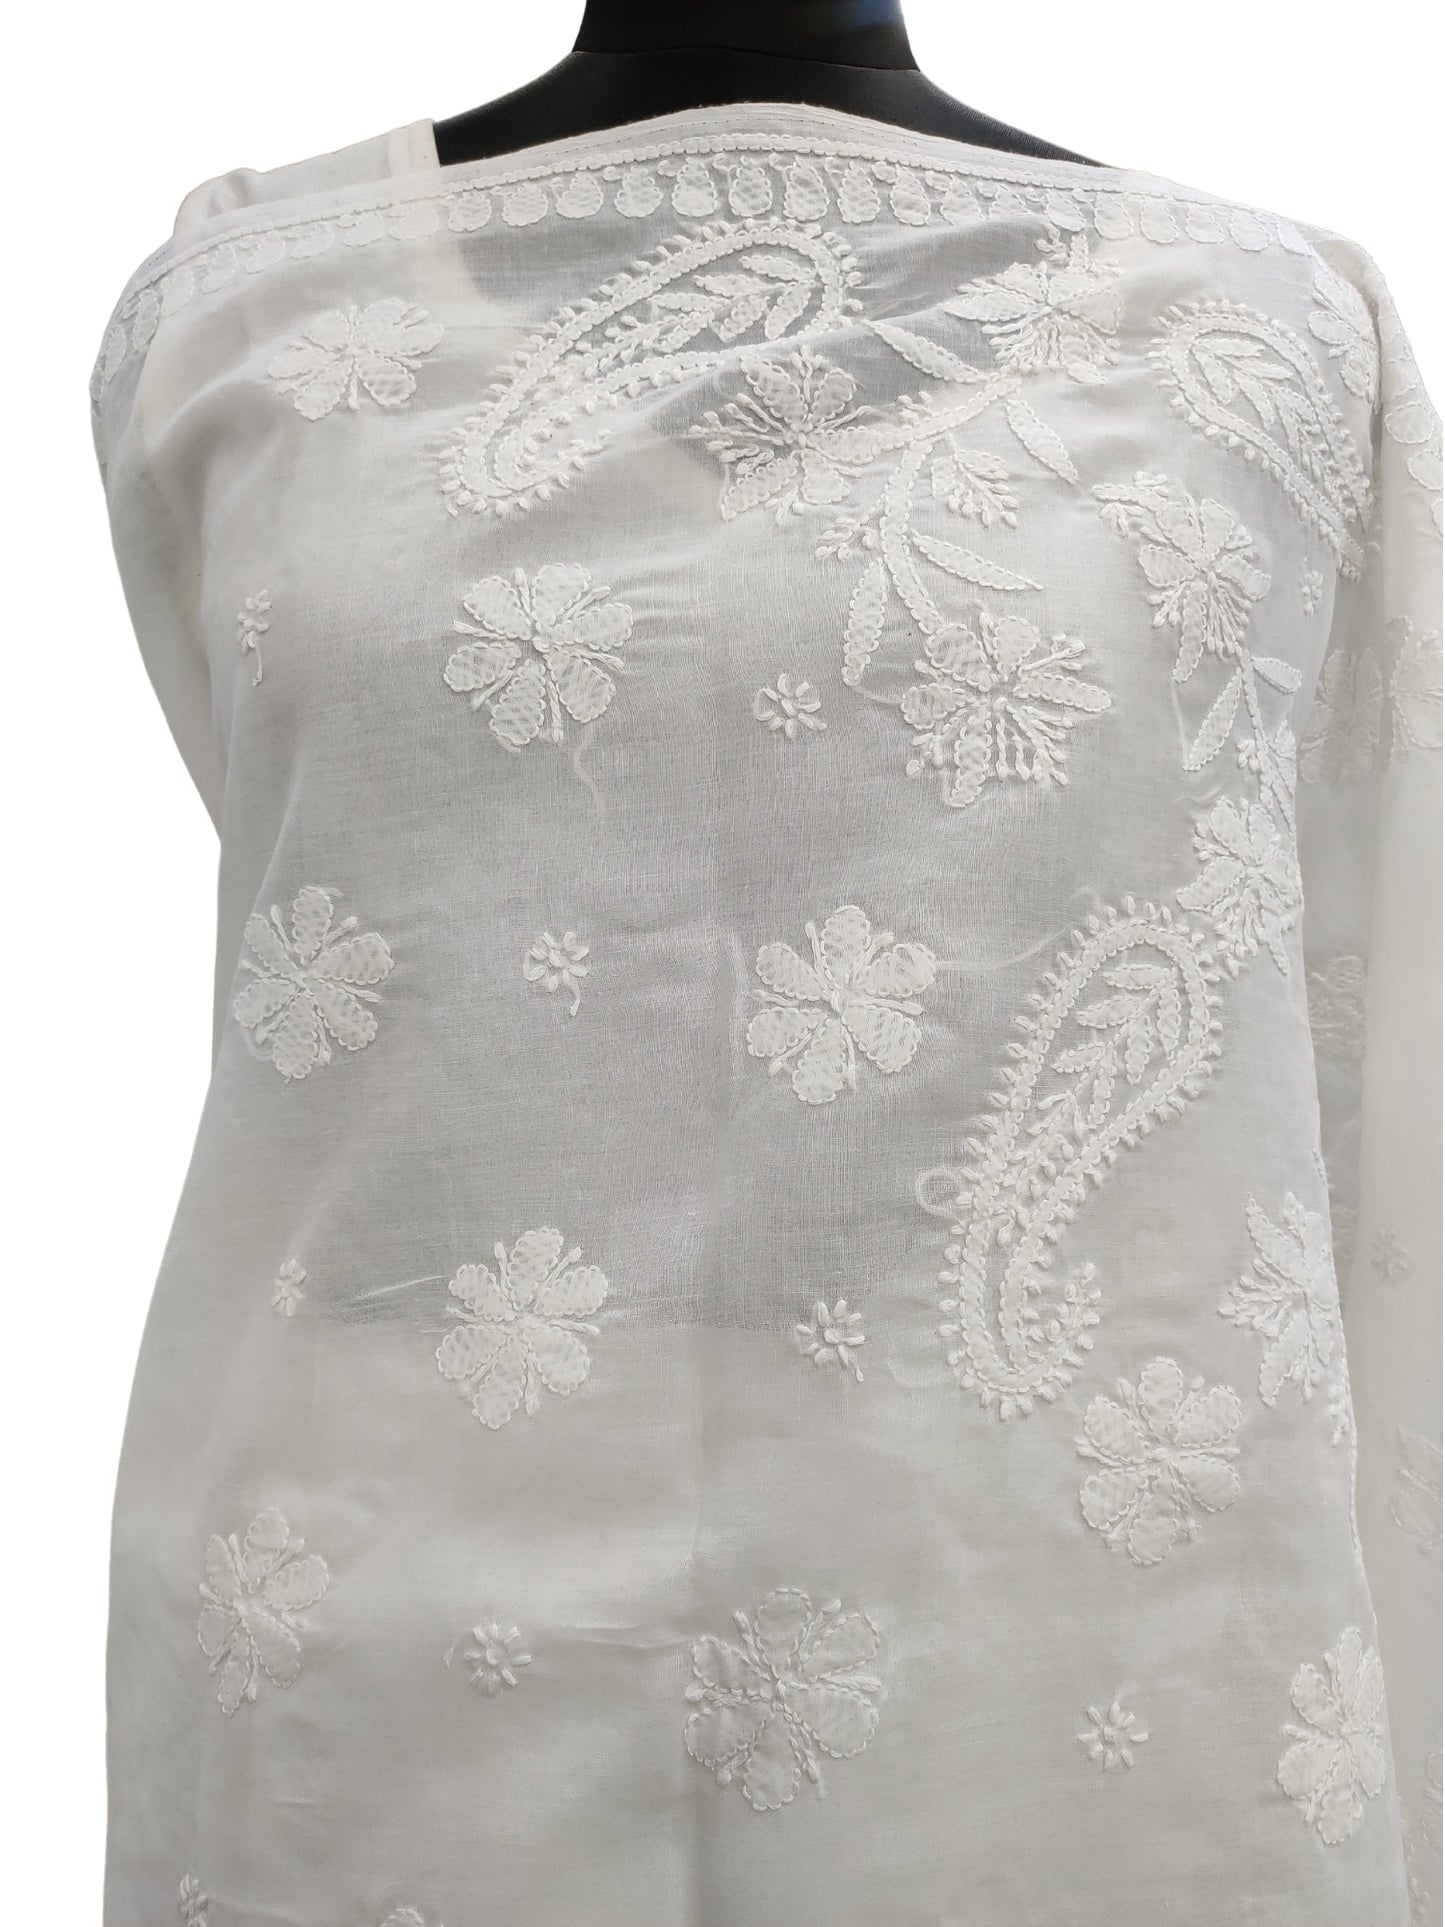 Shyamal Chikan Hand Embroidered White Cotton Lucknowi Chikankari Saree With Blouse Piece- S829